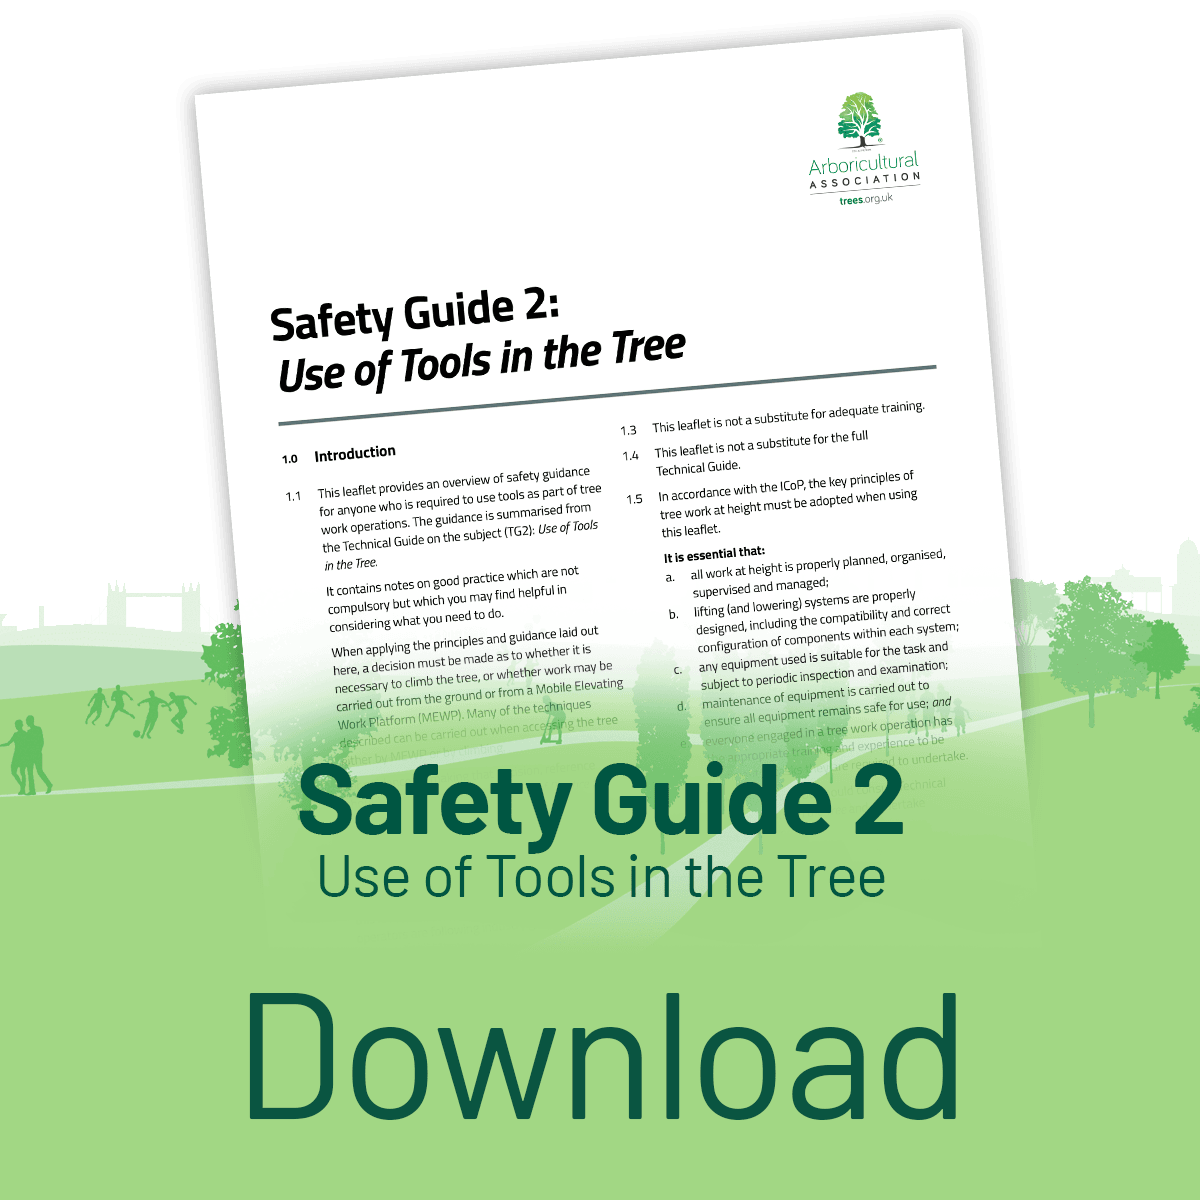 Download the Safety Guide 2